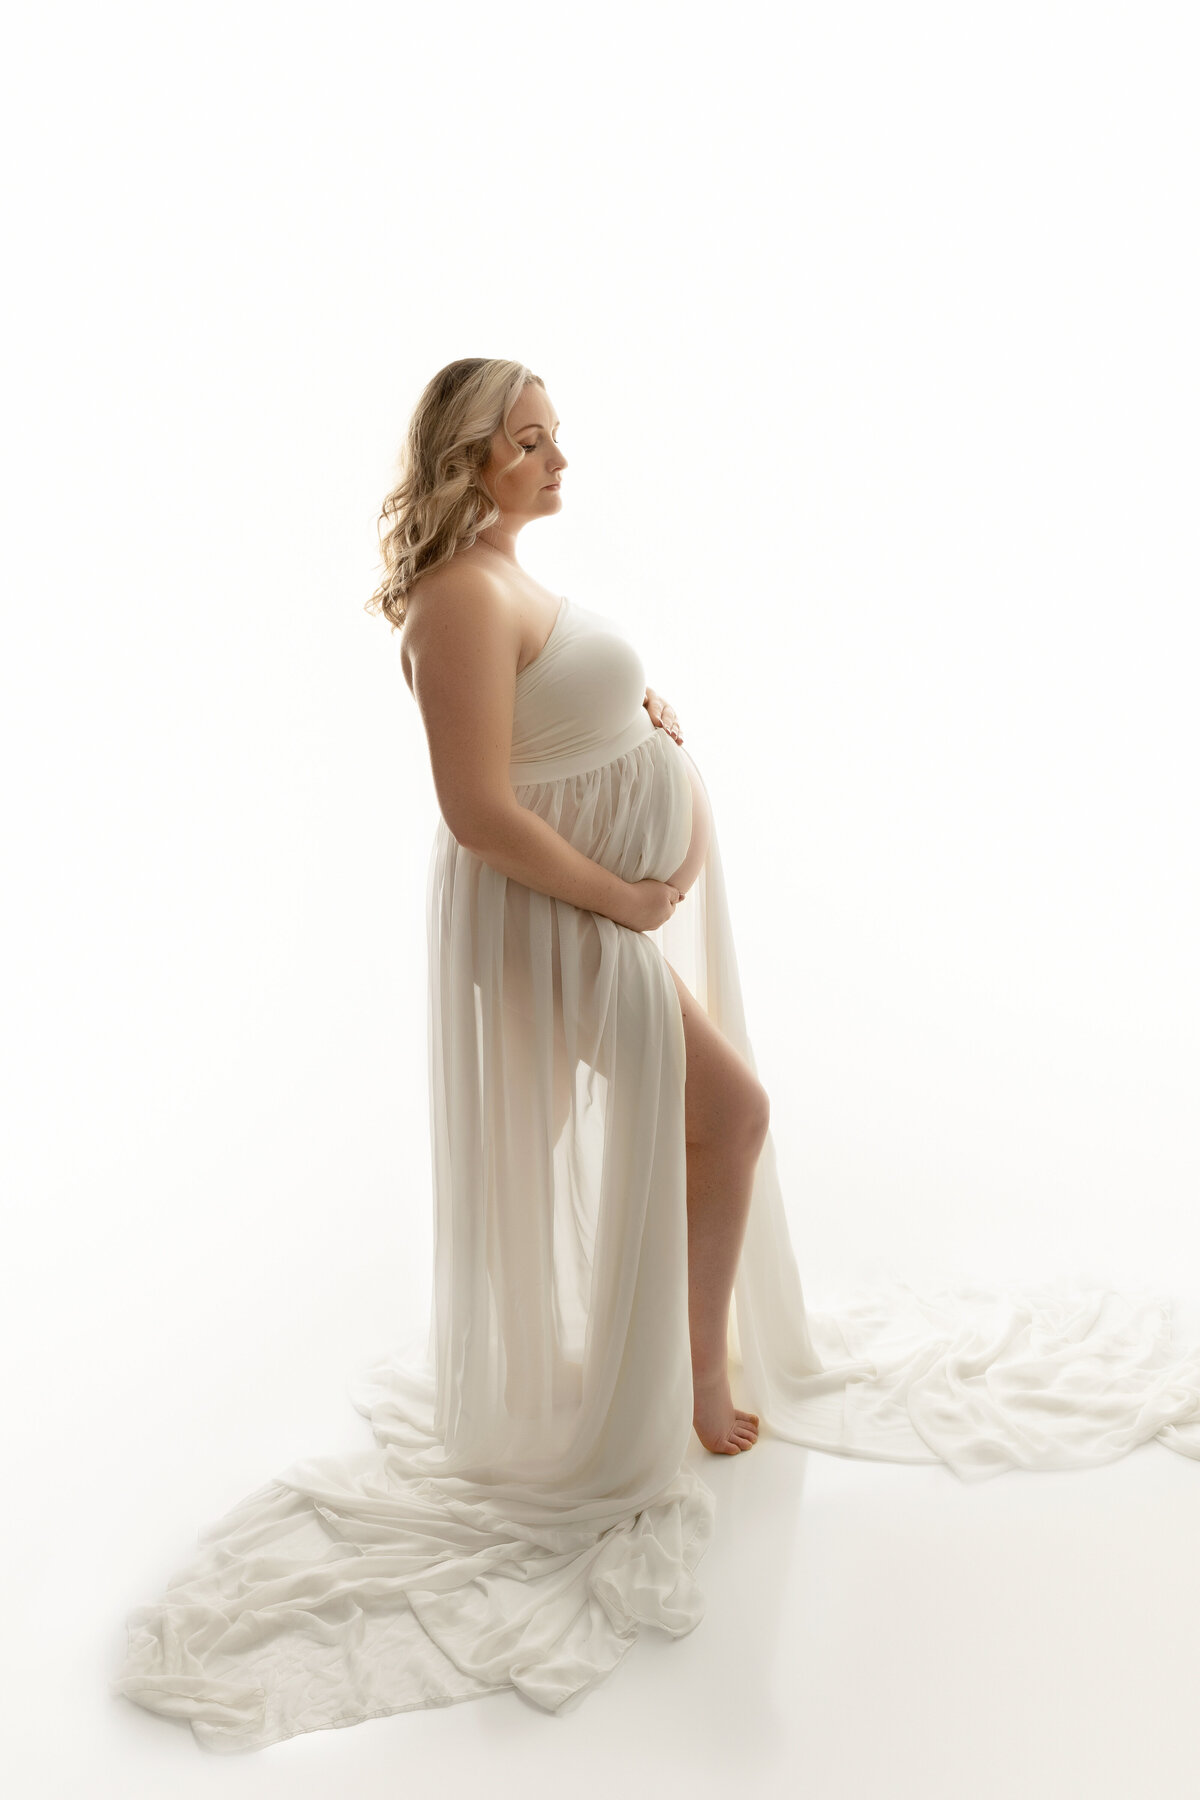 A pregnant woman in a sheer maternity gown stands in a studio holding her bump